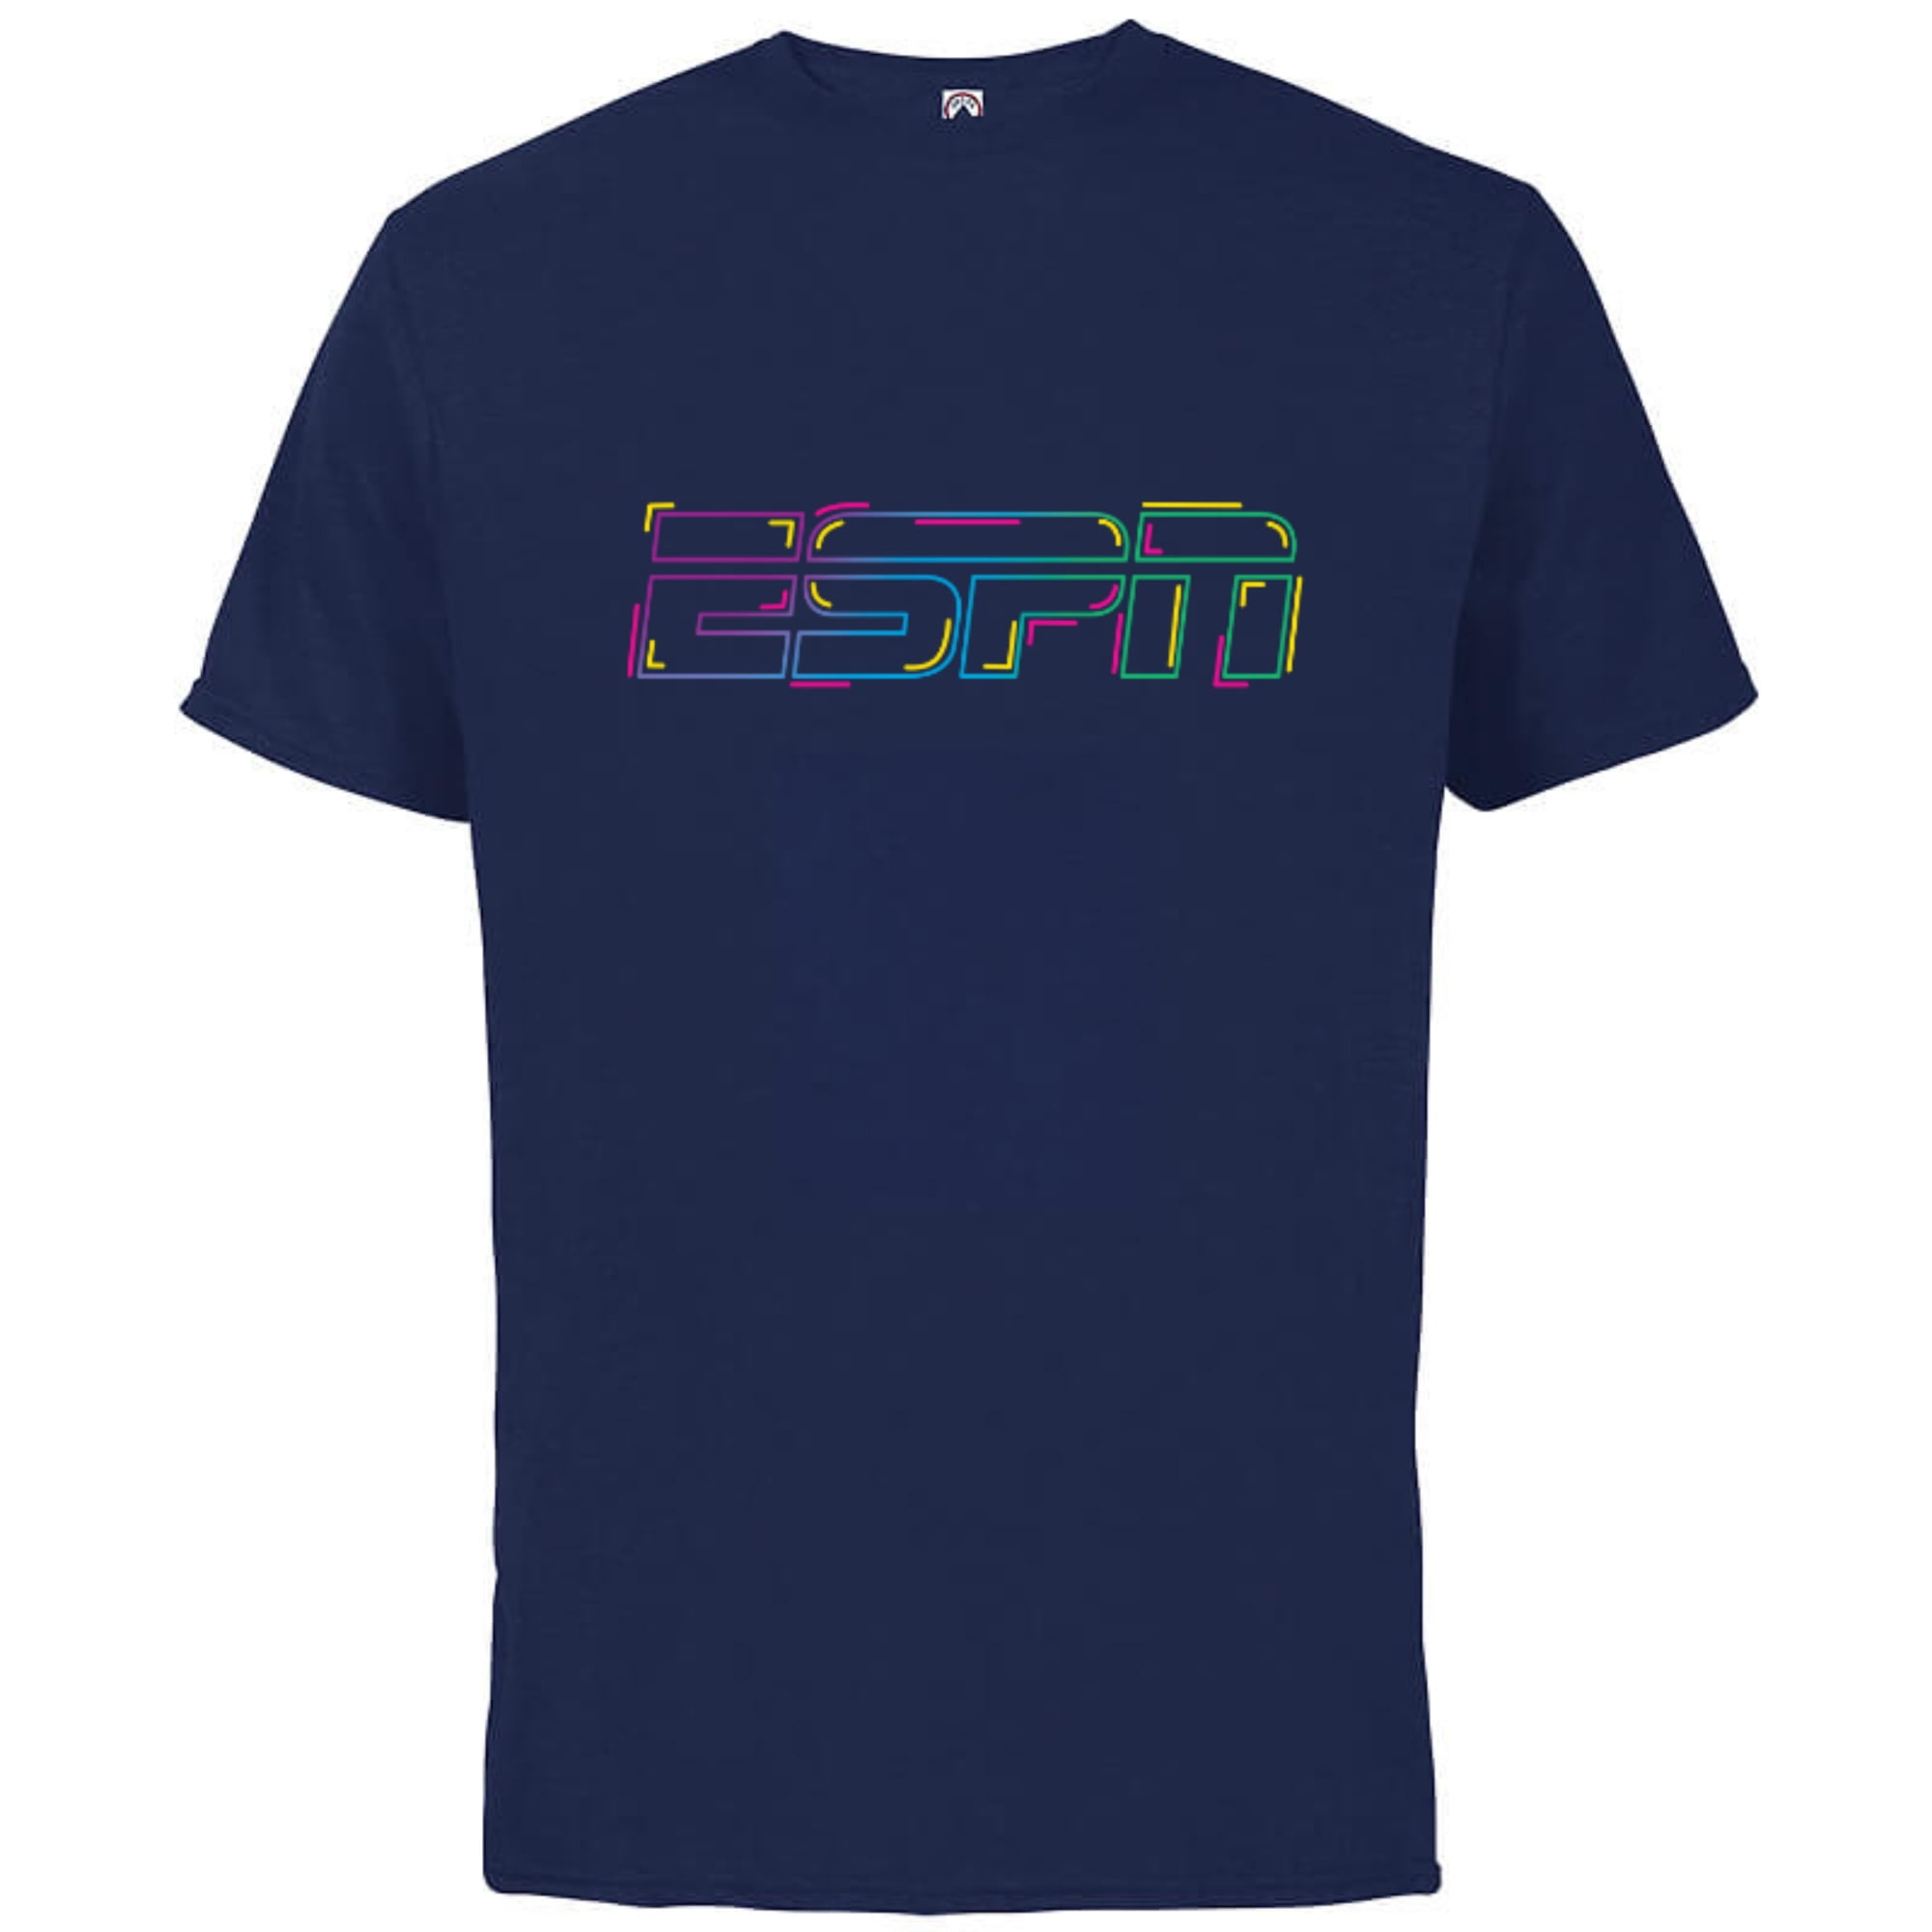 ESPN Logo Colorful Outline Standard - Short Sleeve Cotton T-Shirt for Adults - Customized-Athletic Navy